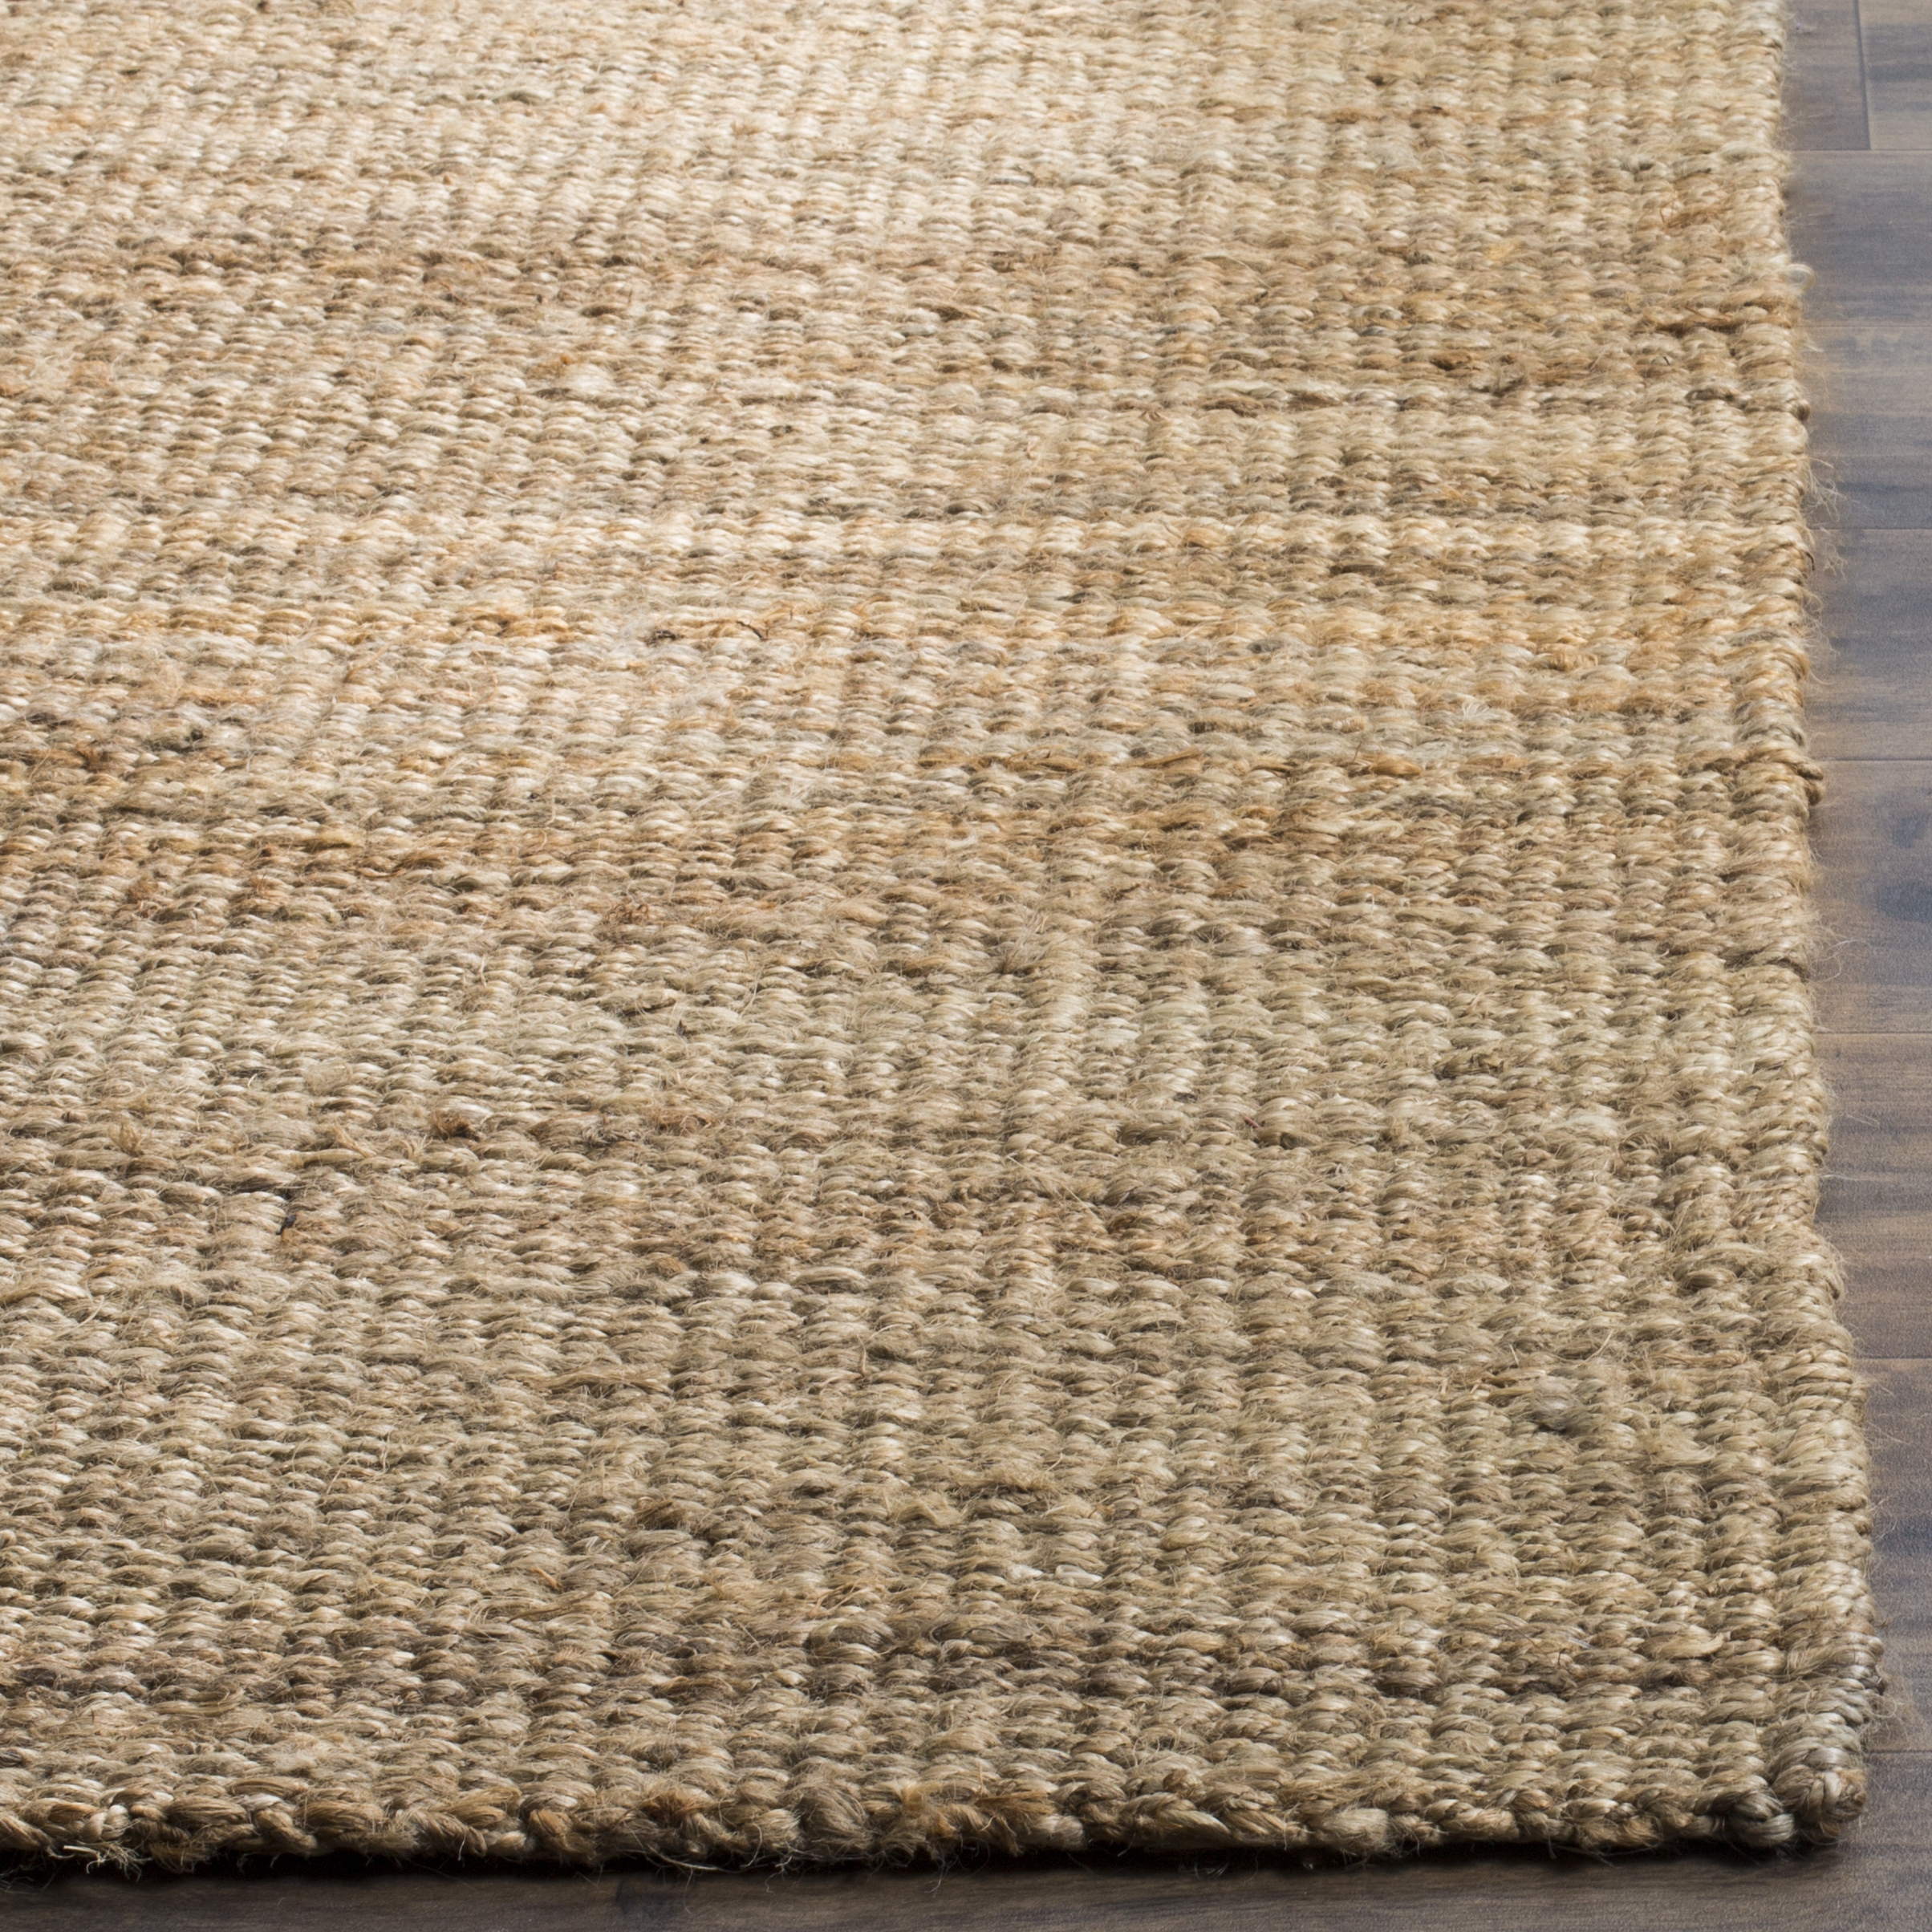 Arlo Home Hand Woven Area Rug, NF732A, Natural,  2' X 3' - Image 1